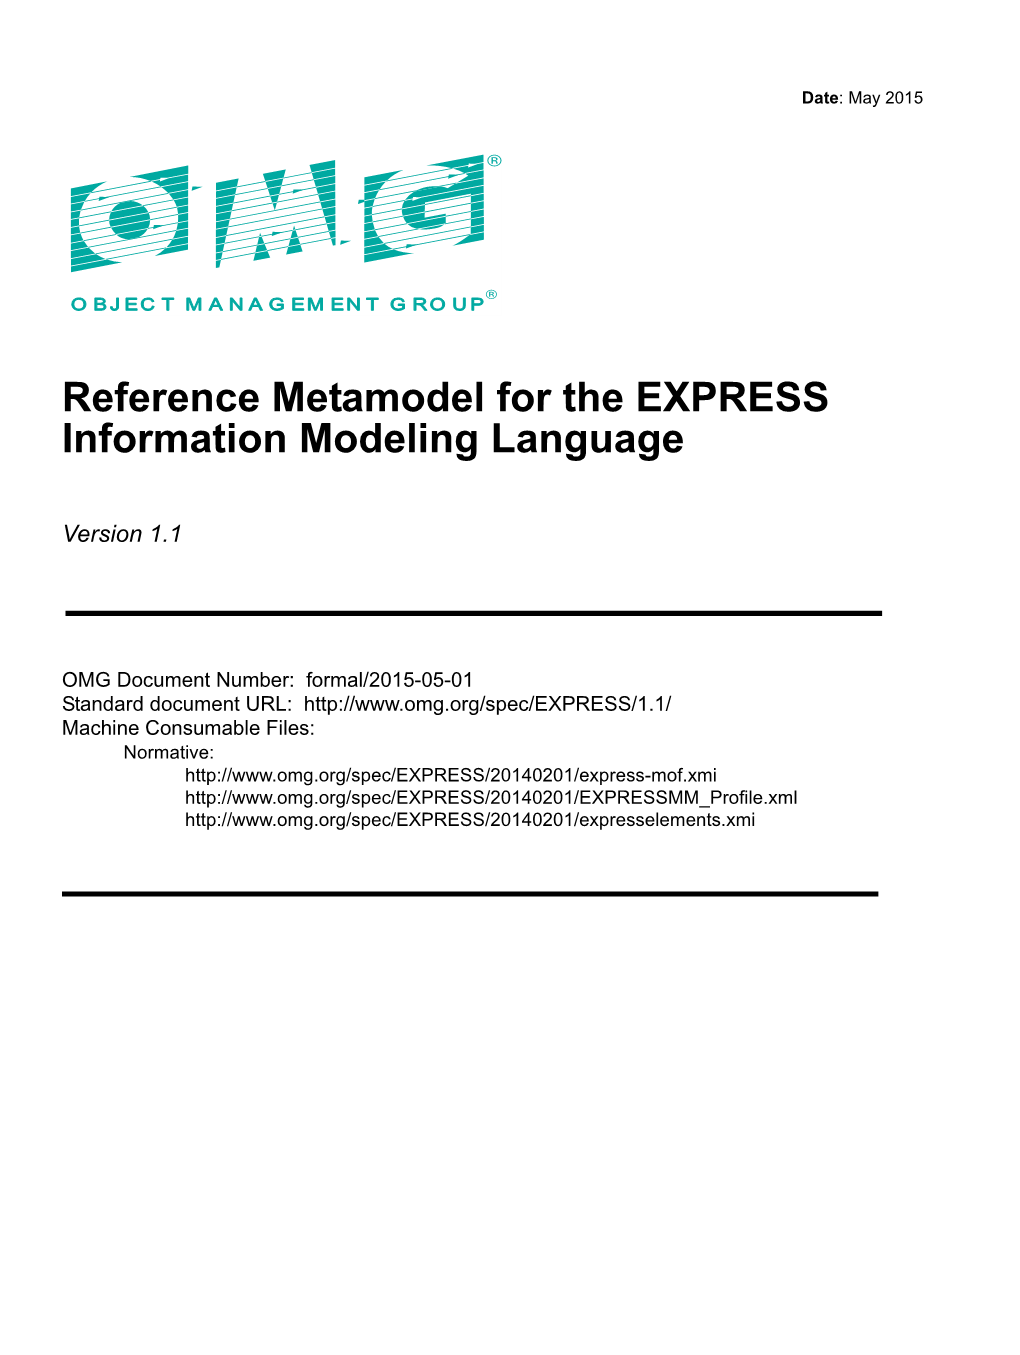 Reference Metamodel for the EXPRESS Information Modeling Language